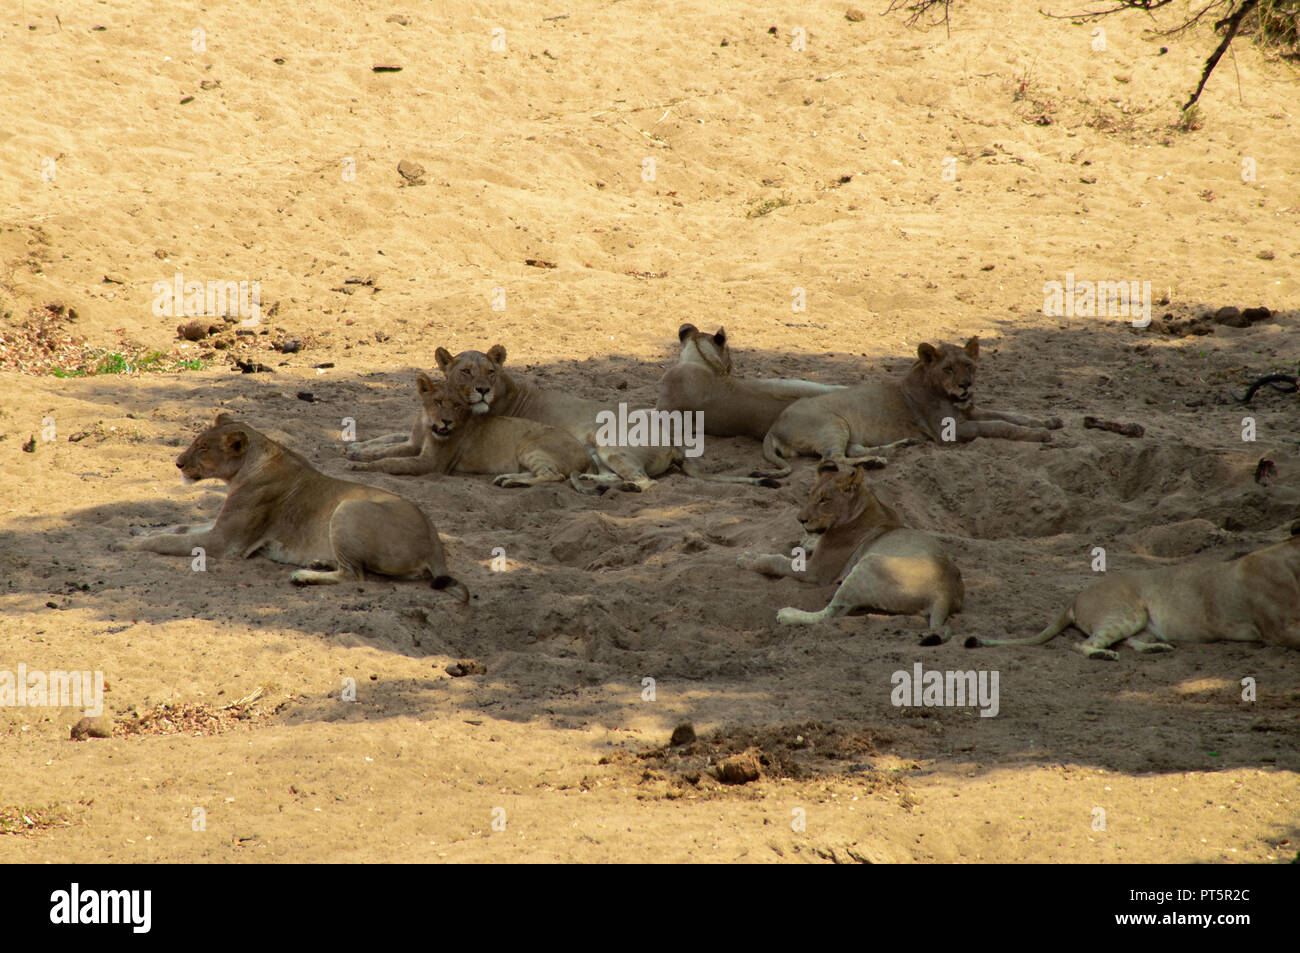 South Africa - Kruger Park - Lions Stock Photo